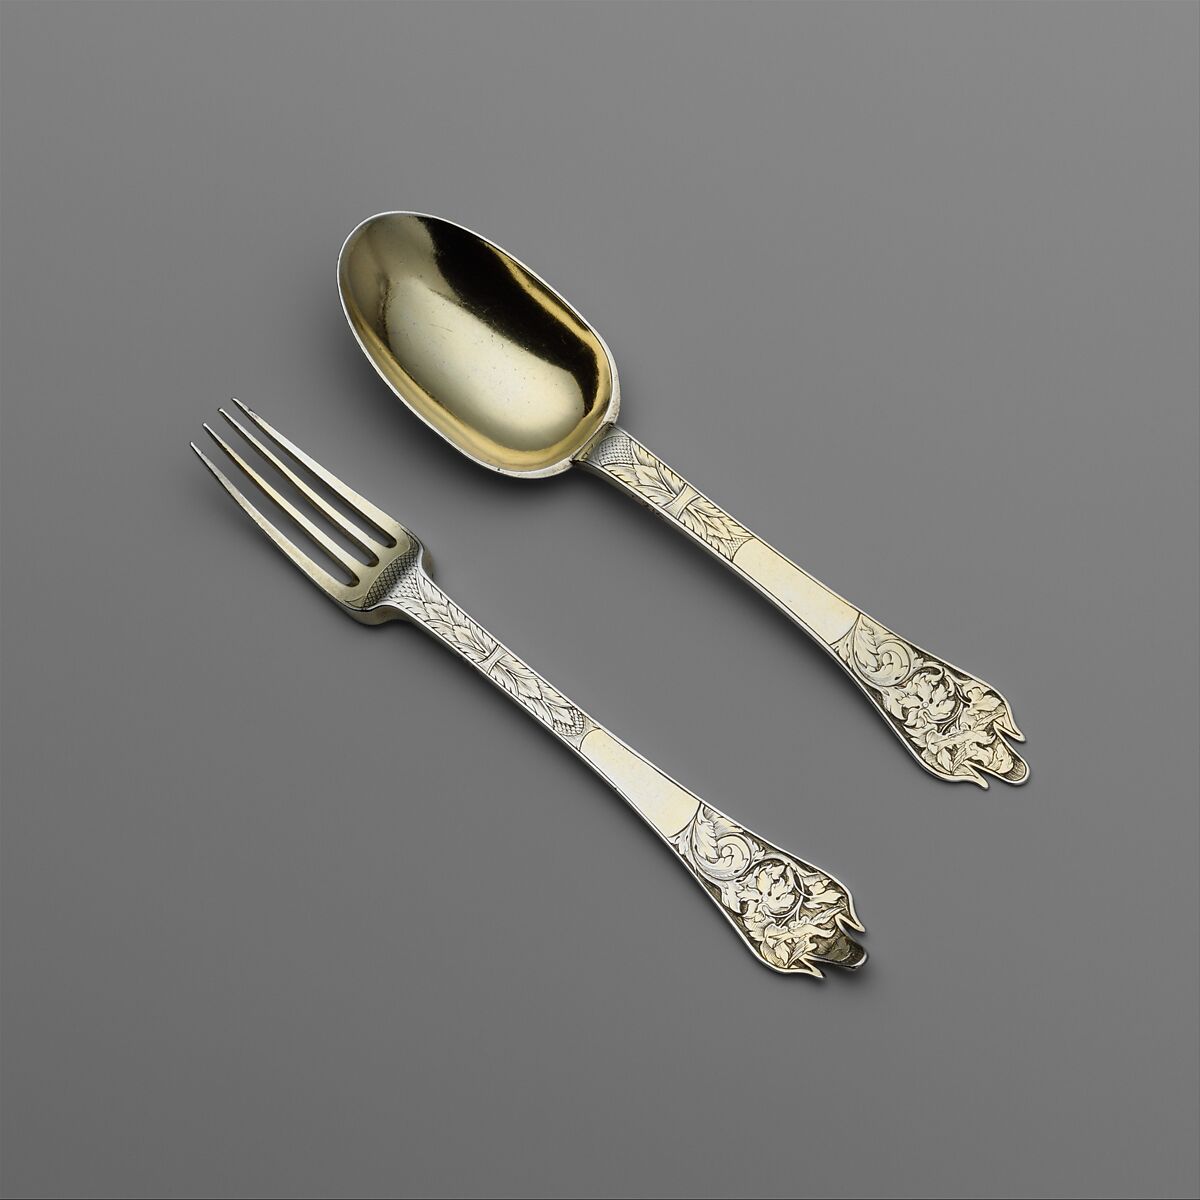 Spoon, Louis Nicolle (master 1666, registered new mark 1680, active 1694), Silver gilt, French, Paris 